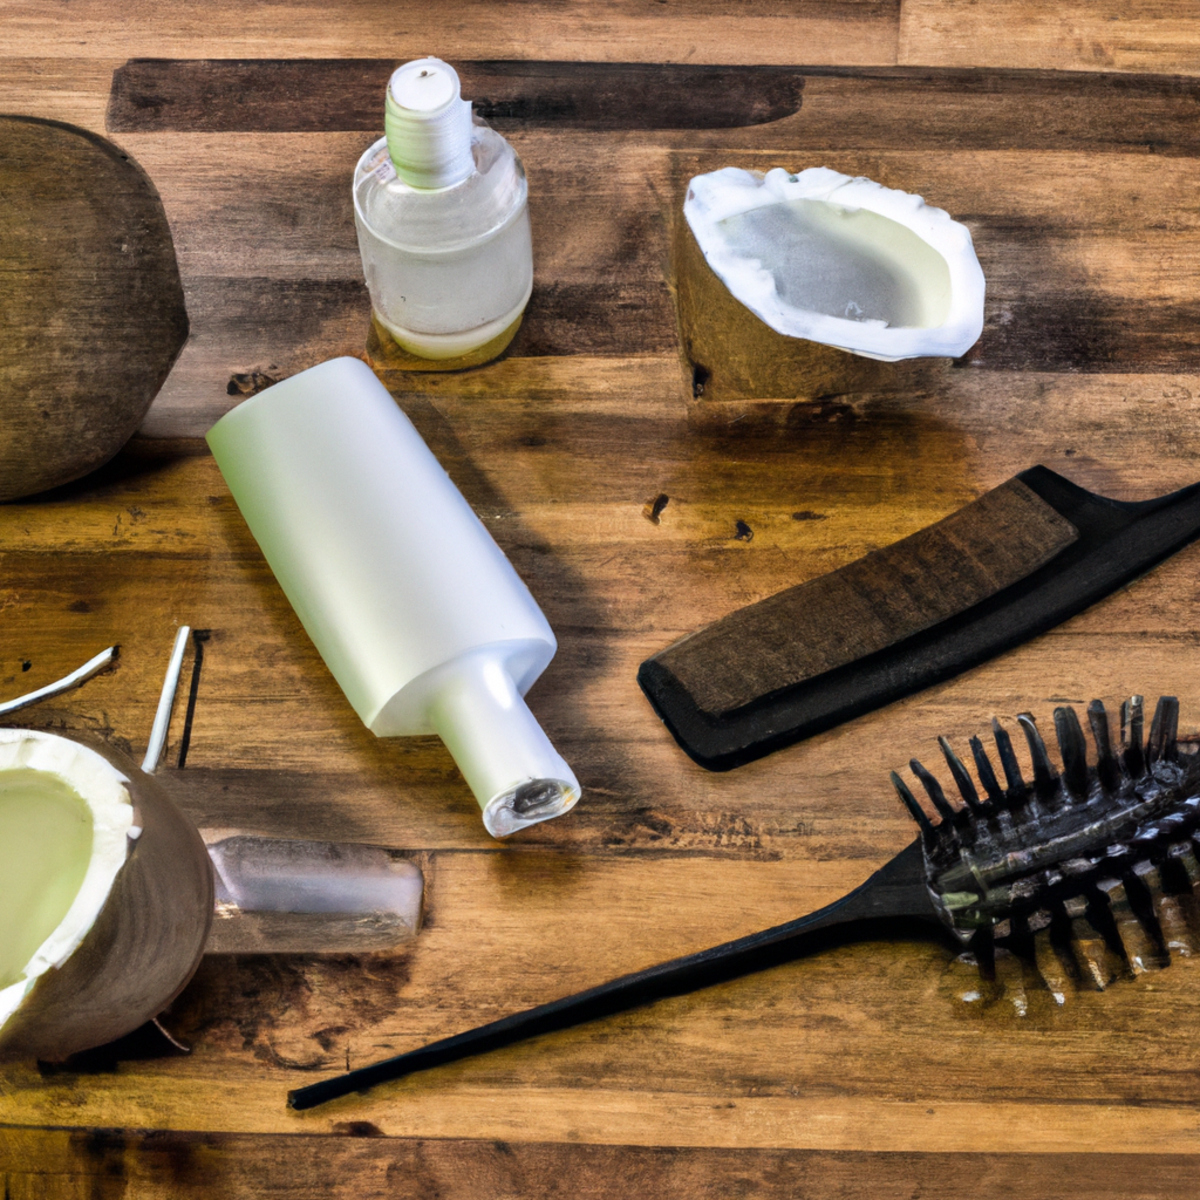 Hair care products scattered on a wooden table, including coconut oil, hairbrush, hair dryer, and hair ties.